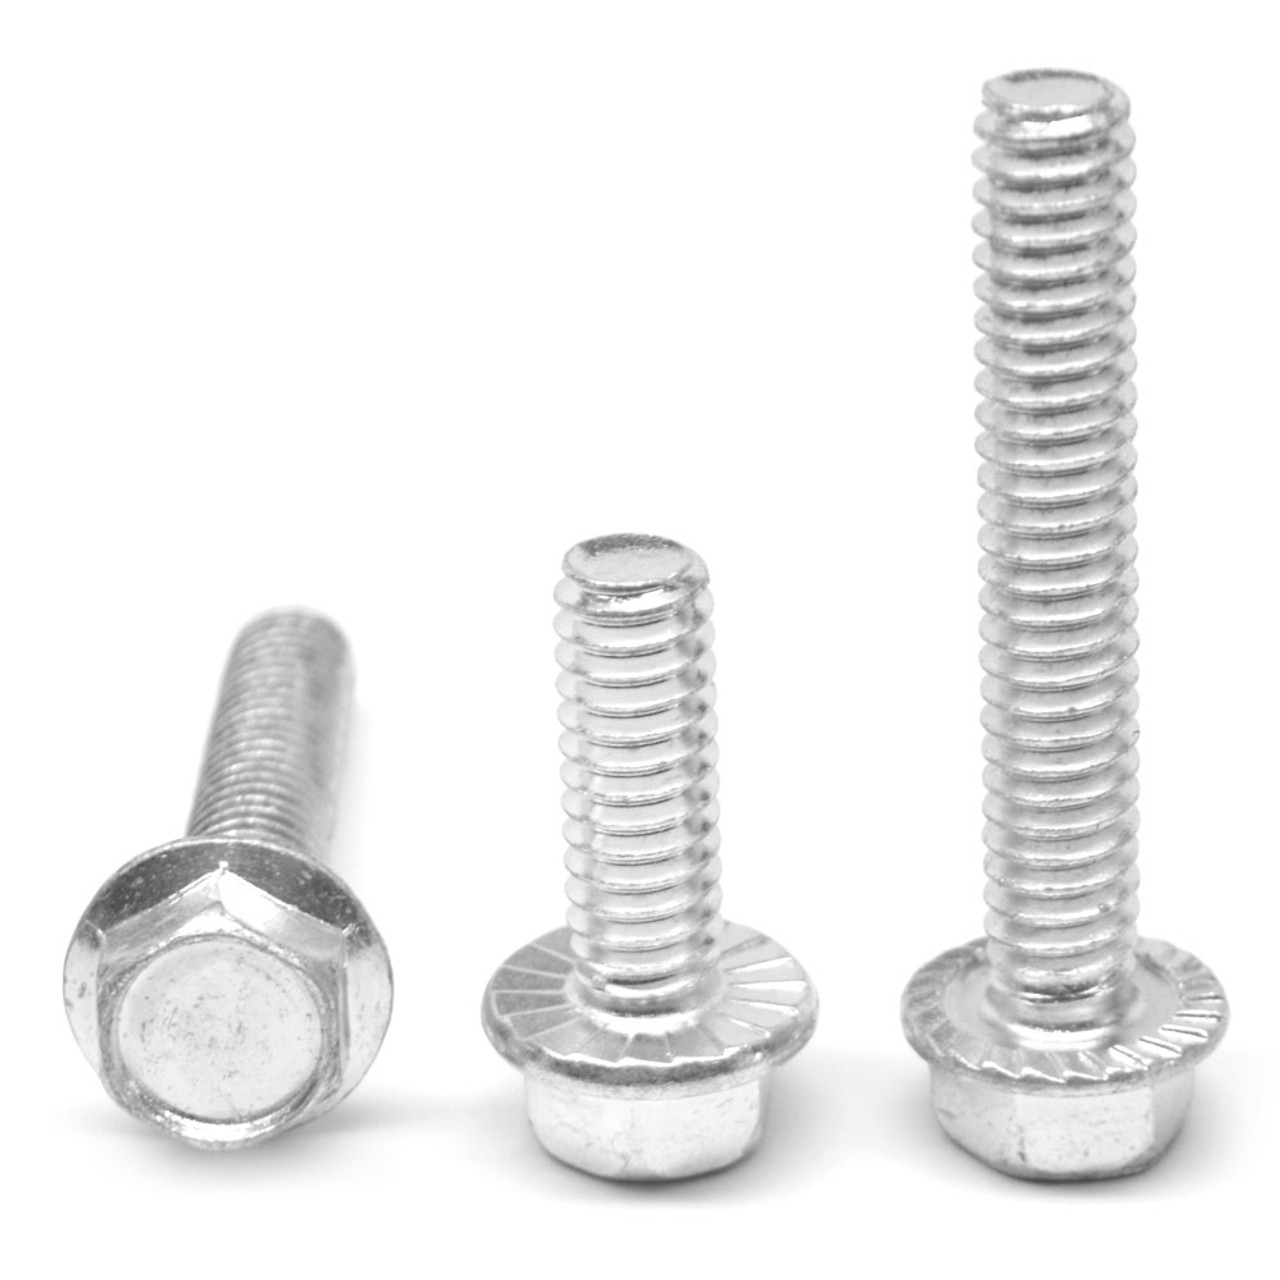 #4-40 x 1/4" (FT) Coarse Thread Hex Flange Screw with Serration Case Hardened Low Carbon Steel Zinc Plated